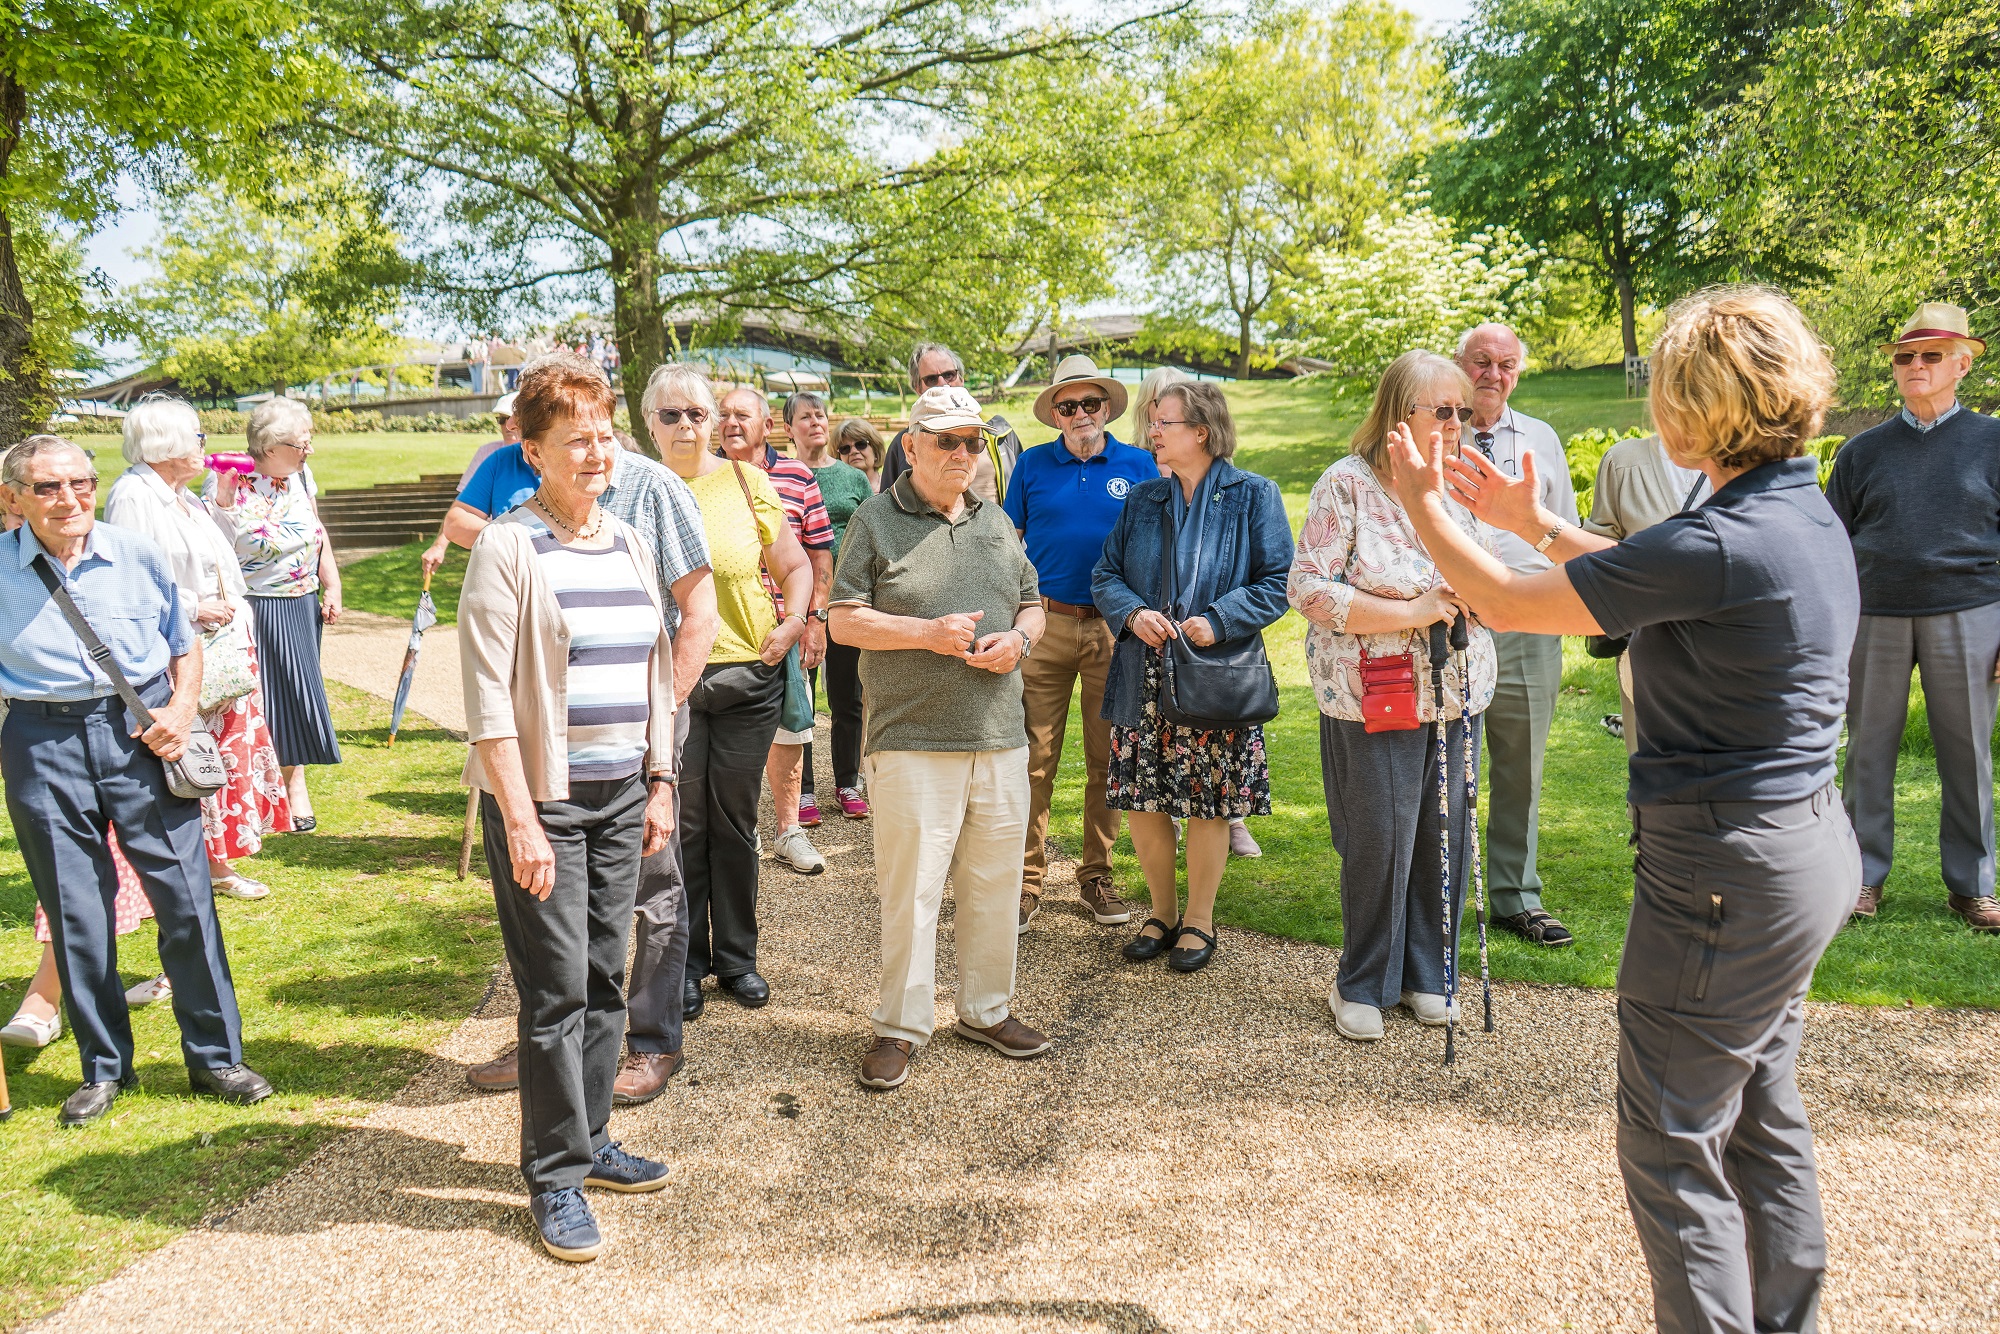 Group visitors with a guide in The Savill Garden.